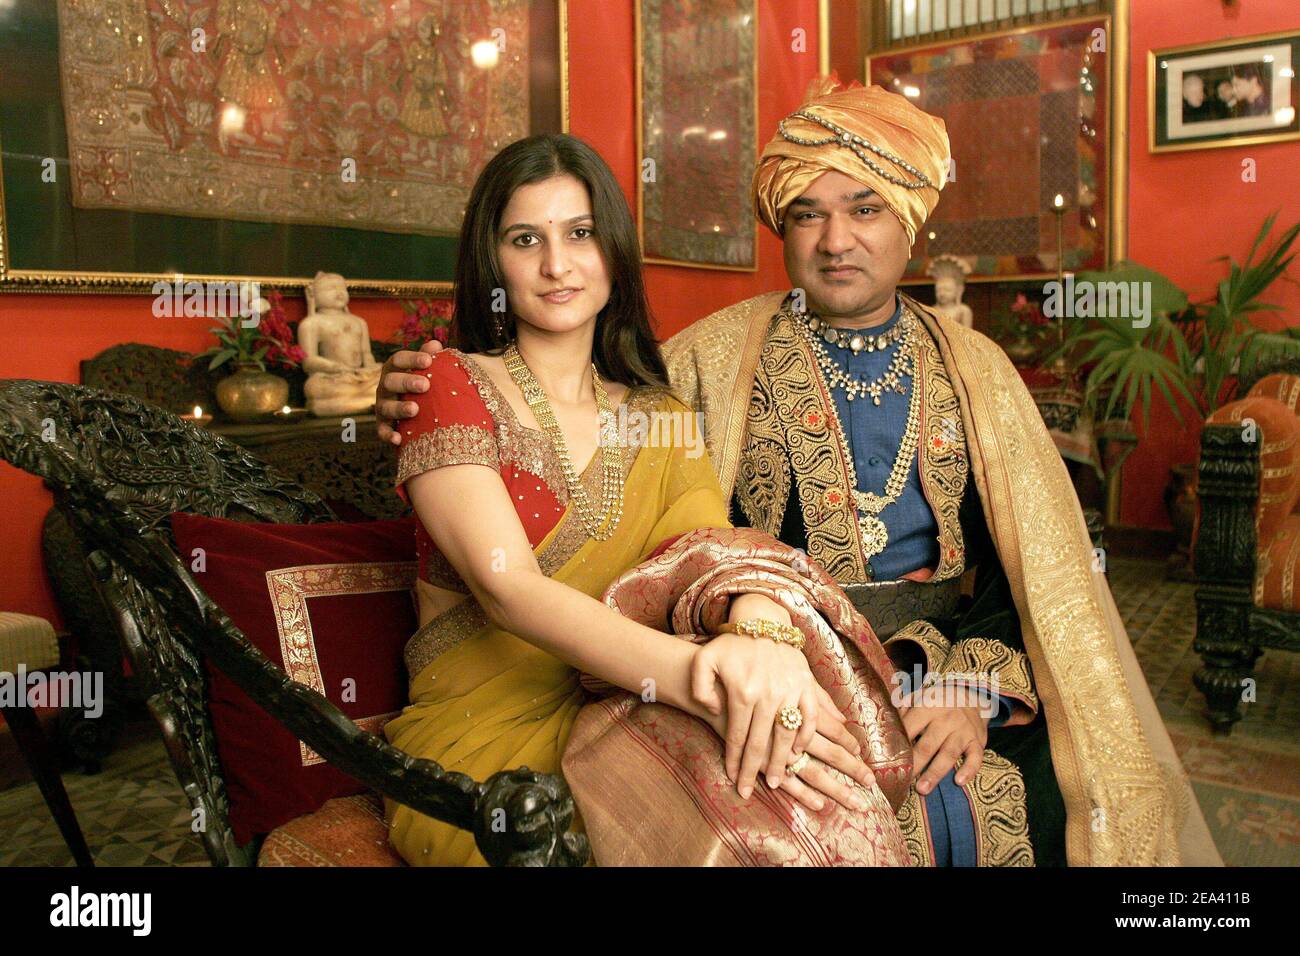 EXCLUSIVE. Umang Hutheesing, Lord of Ahmedabad, poses with his wife in his recently restored palace in Ahmedabad, Gujarat State, India, in March 2005. Photo by Alexis Orand/ABACA. Stock Photo